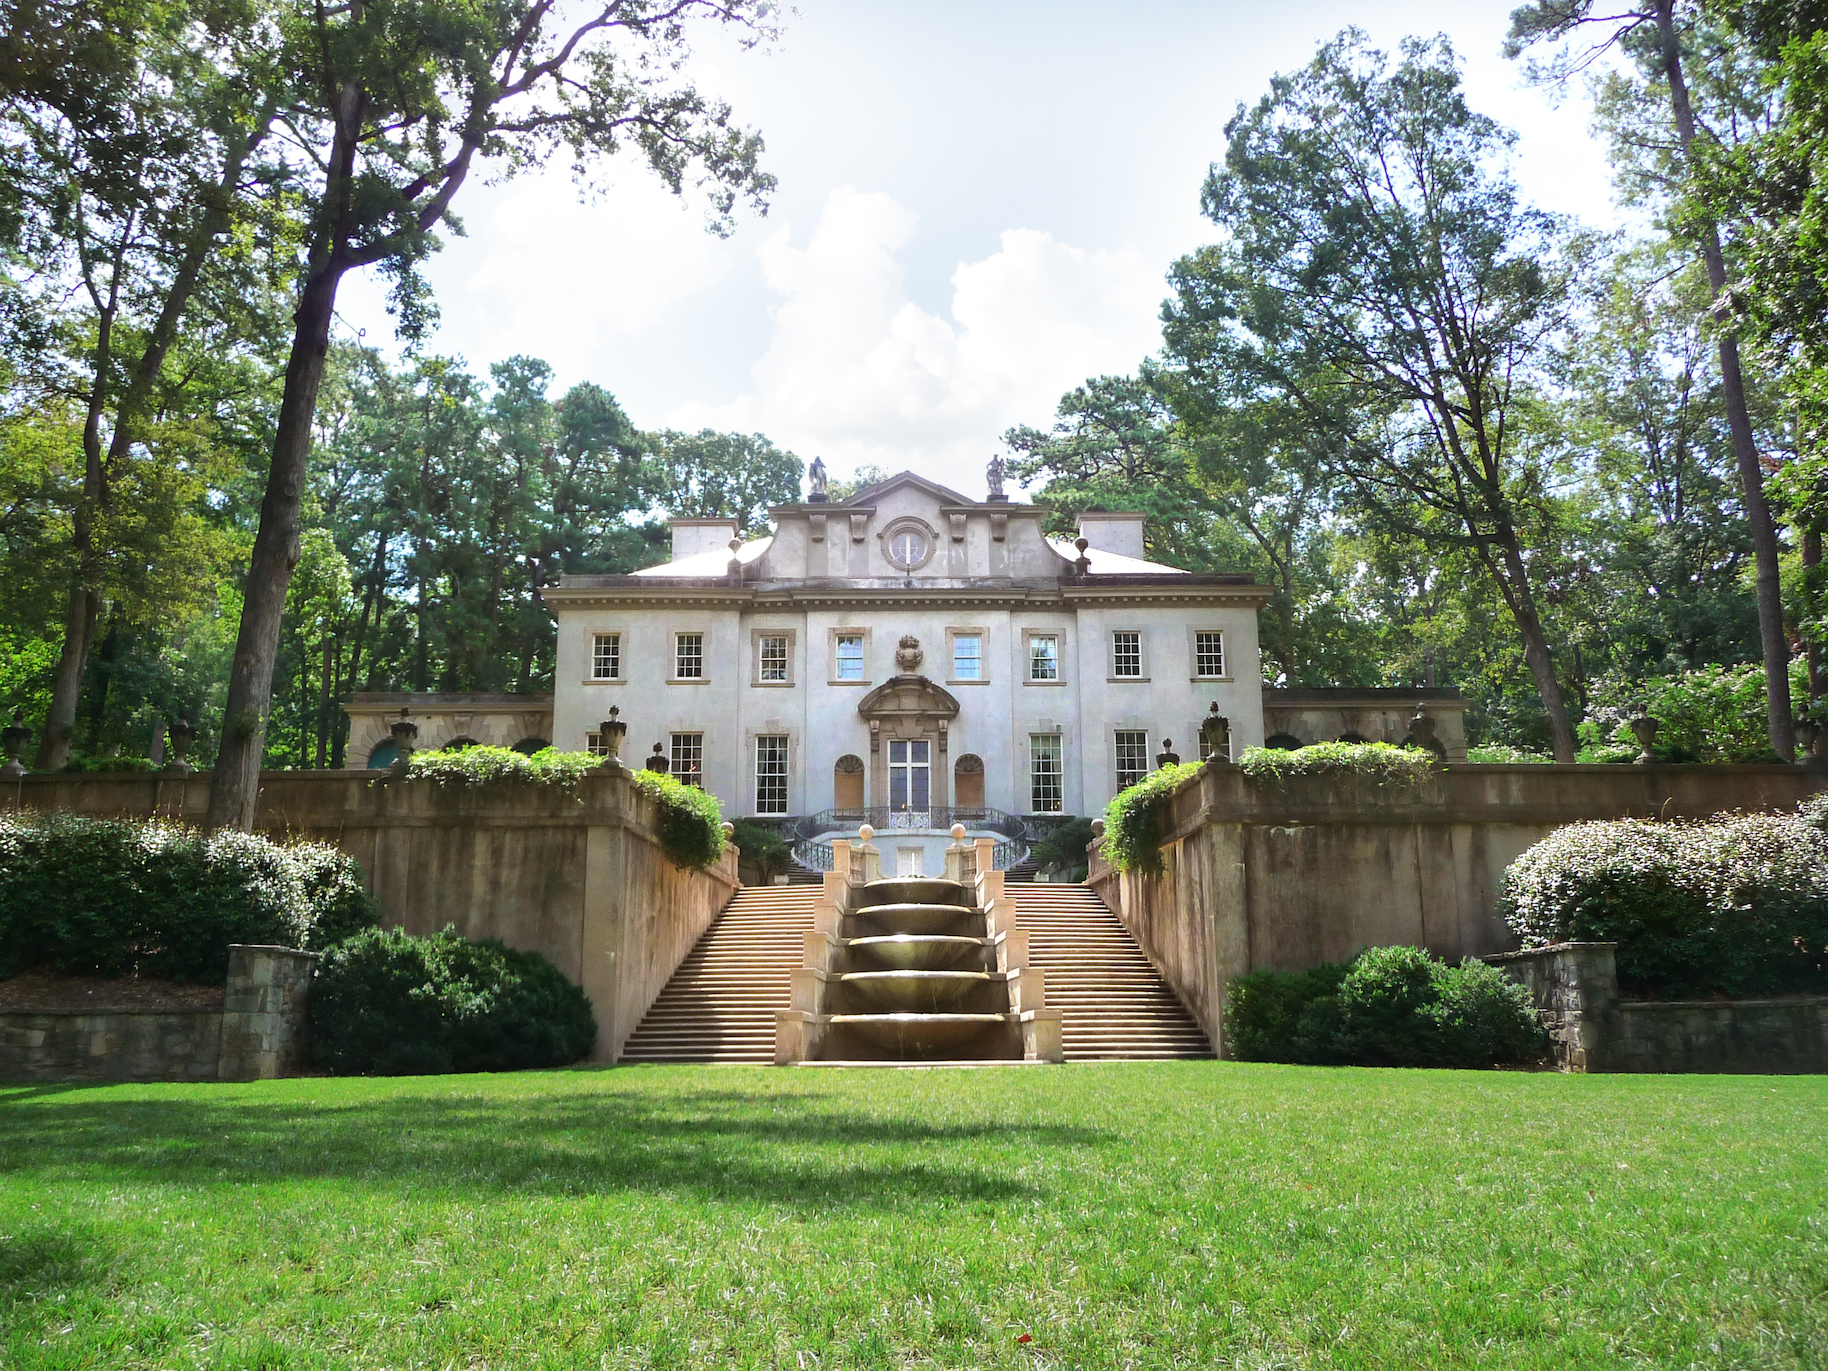 When touring this home, you'll get a glimpse into the lifestyle of a Georgia family during the 1920s and 1930s. The Swan House at Atlanta History Center is open daily for tours.